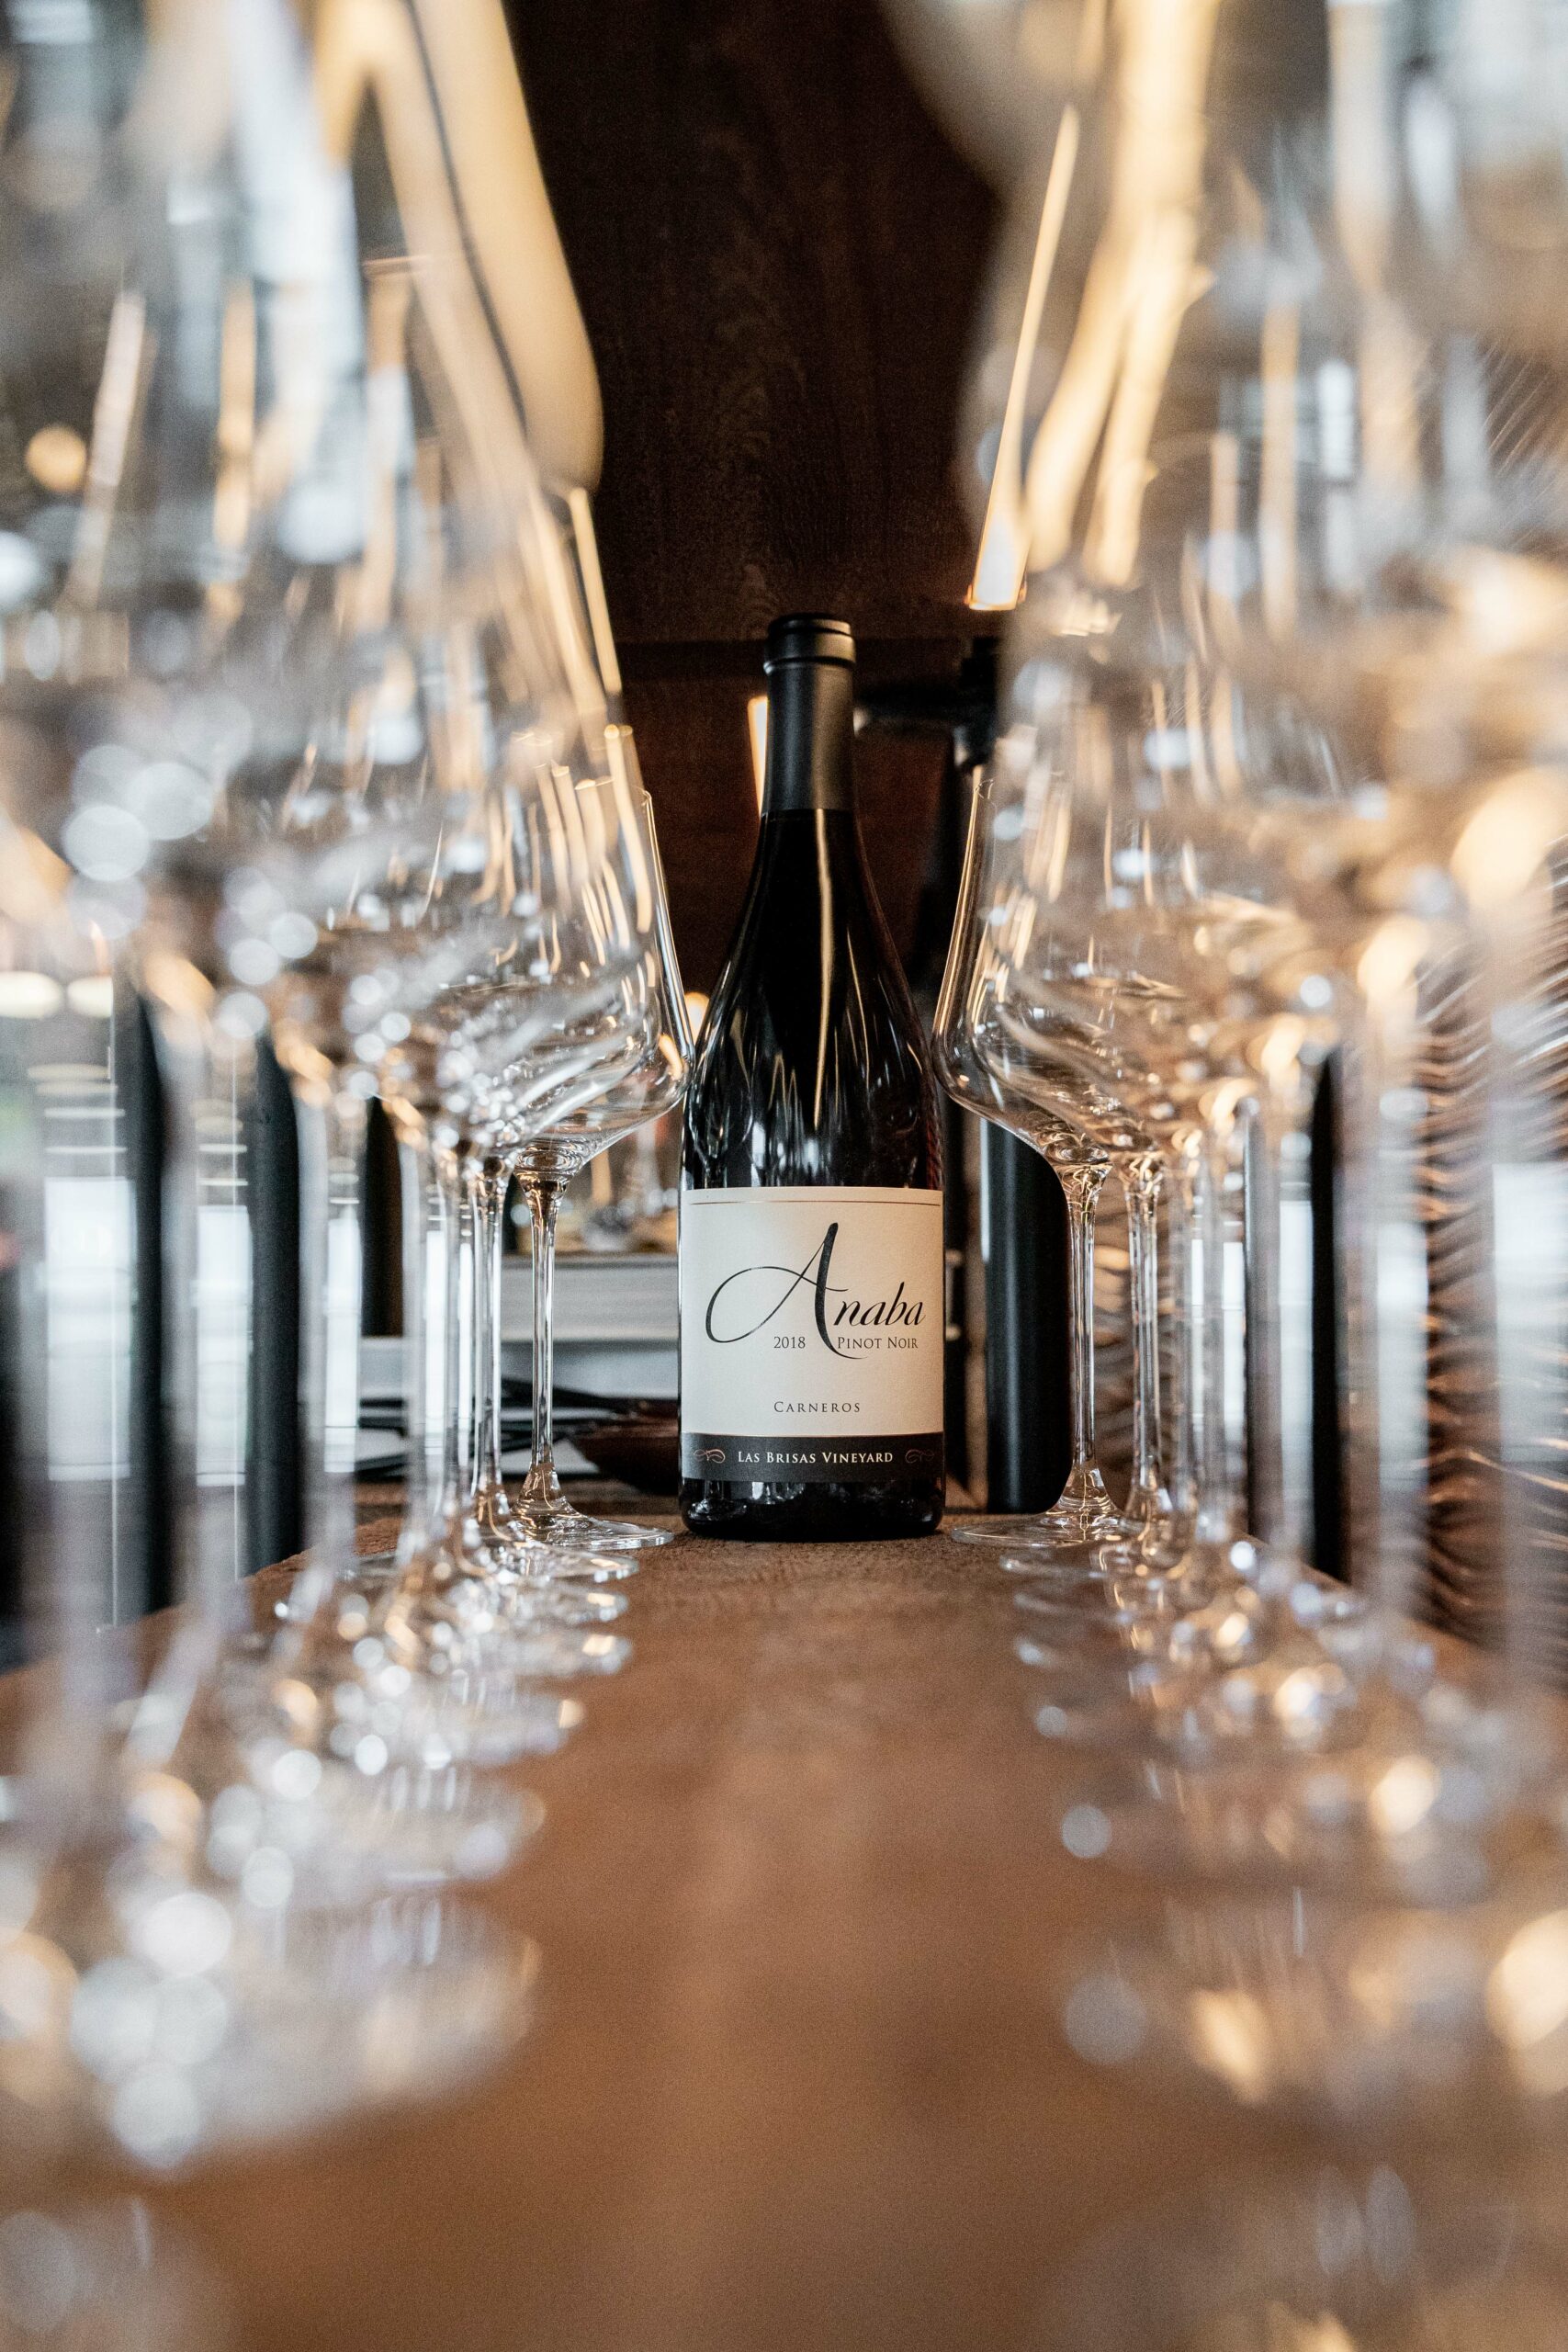 A low angle shot of Anaba Pinot Noir centred in the mid-ground, with rows of blurred wine glasses in the foreground, lining either side of the image, leading up to the bottle of wine. 